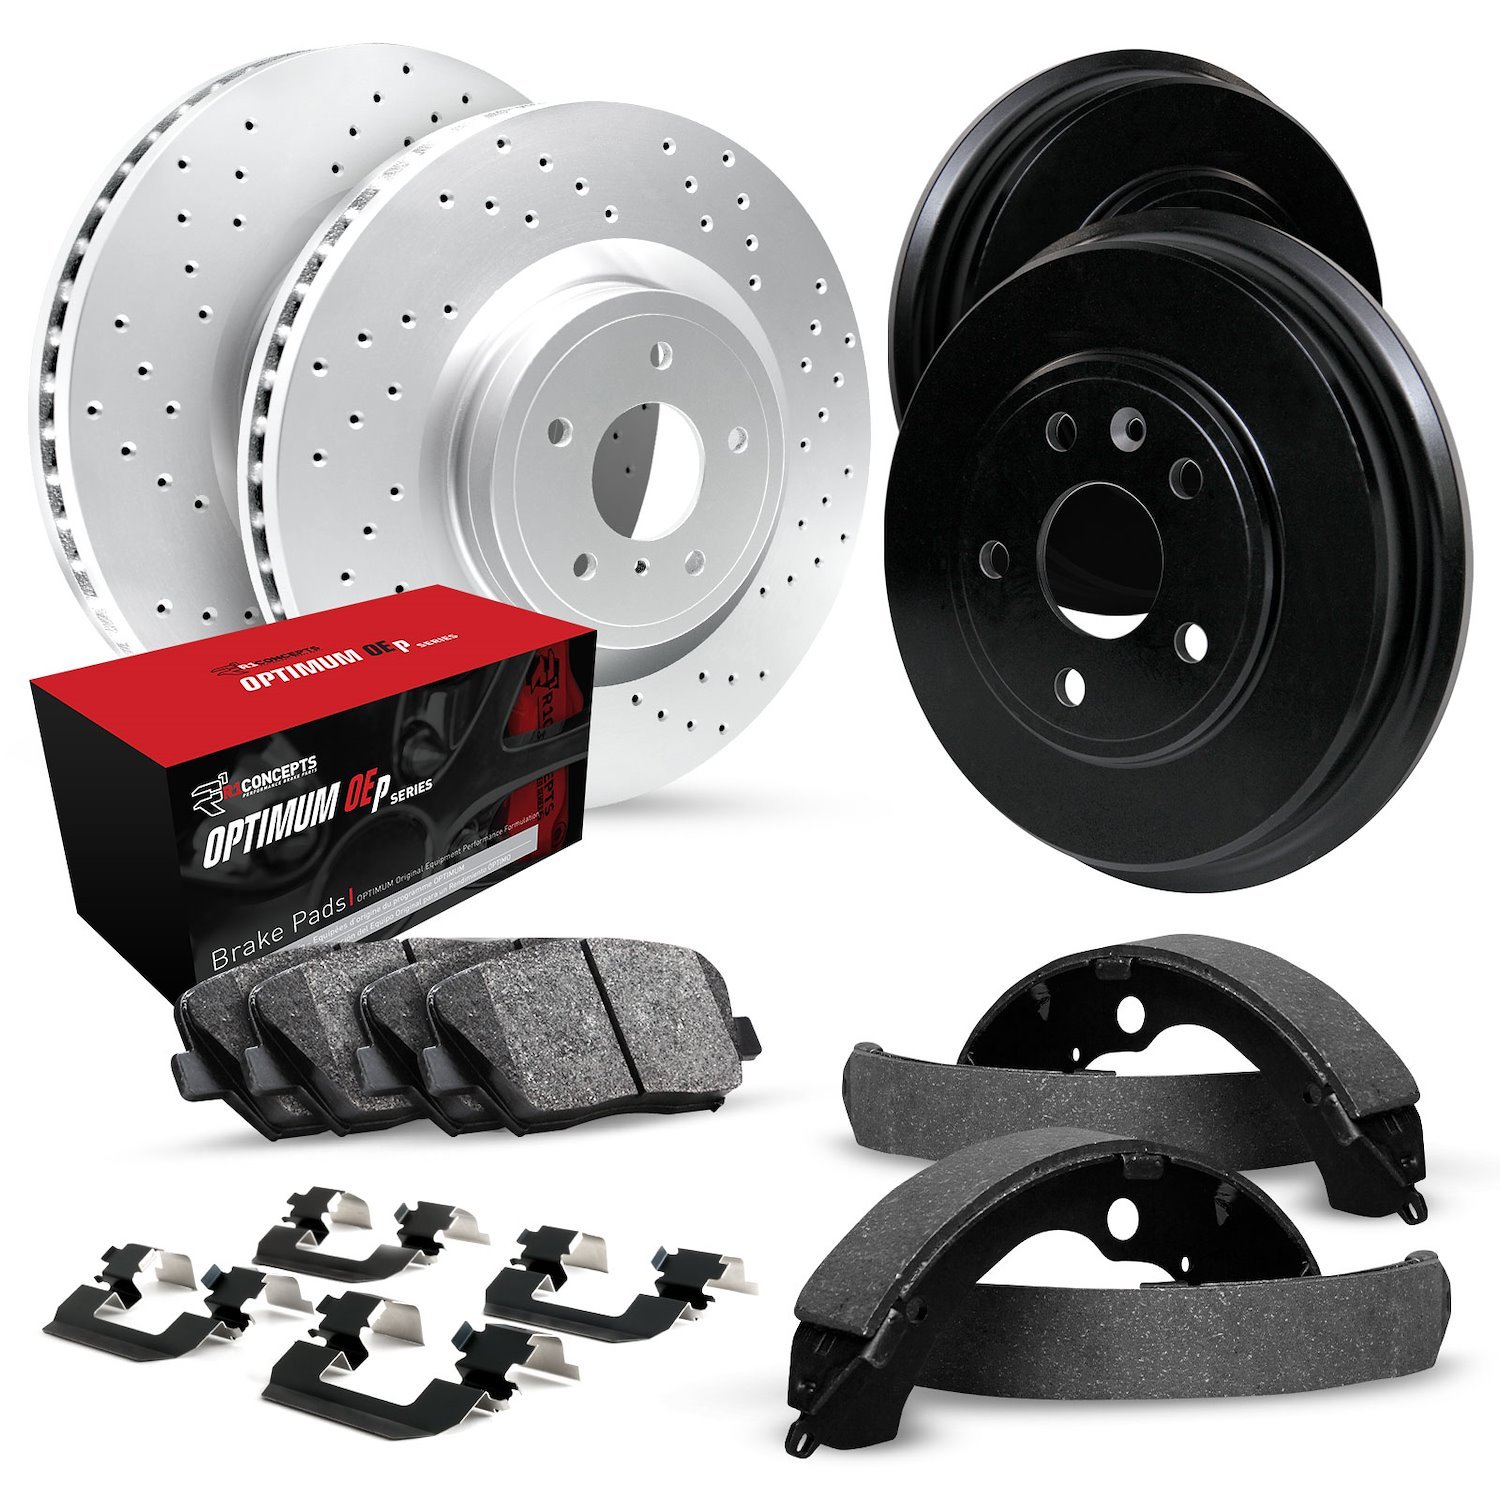 GEO-Carbon Drilled Brake Rotor & Drum Set w/Optimum OE Pads, Shoes, & Hardware, 1992-2001 GM, Position: Front & Rear